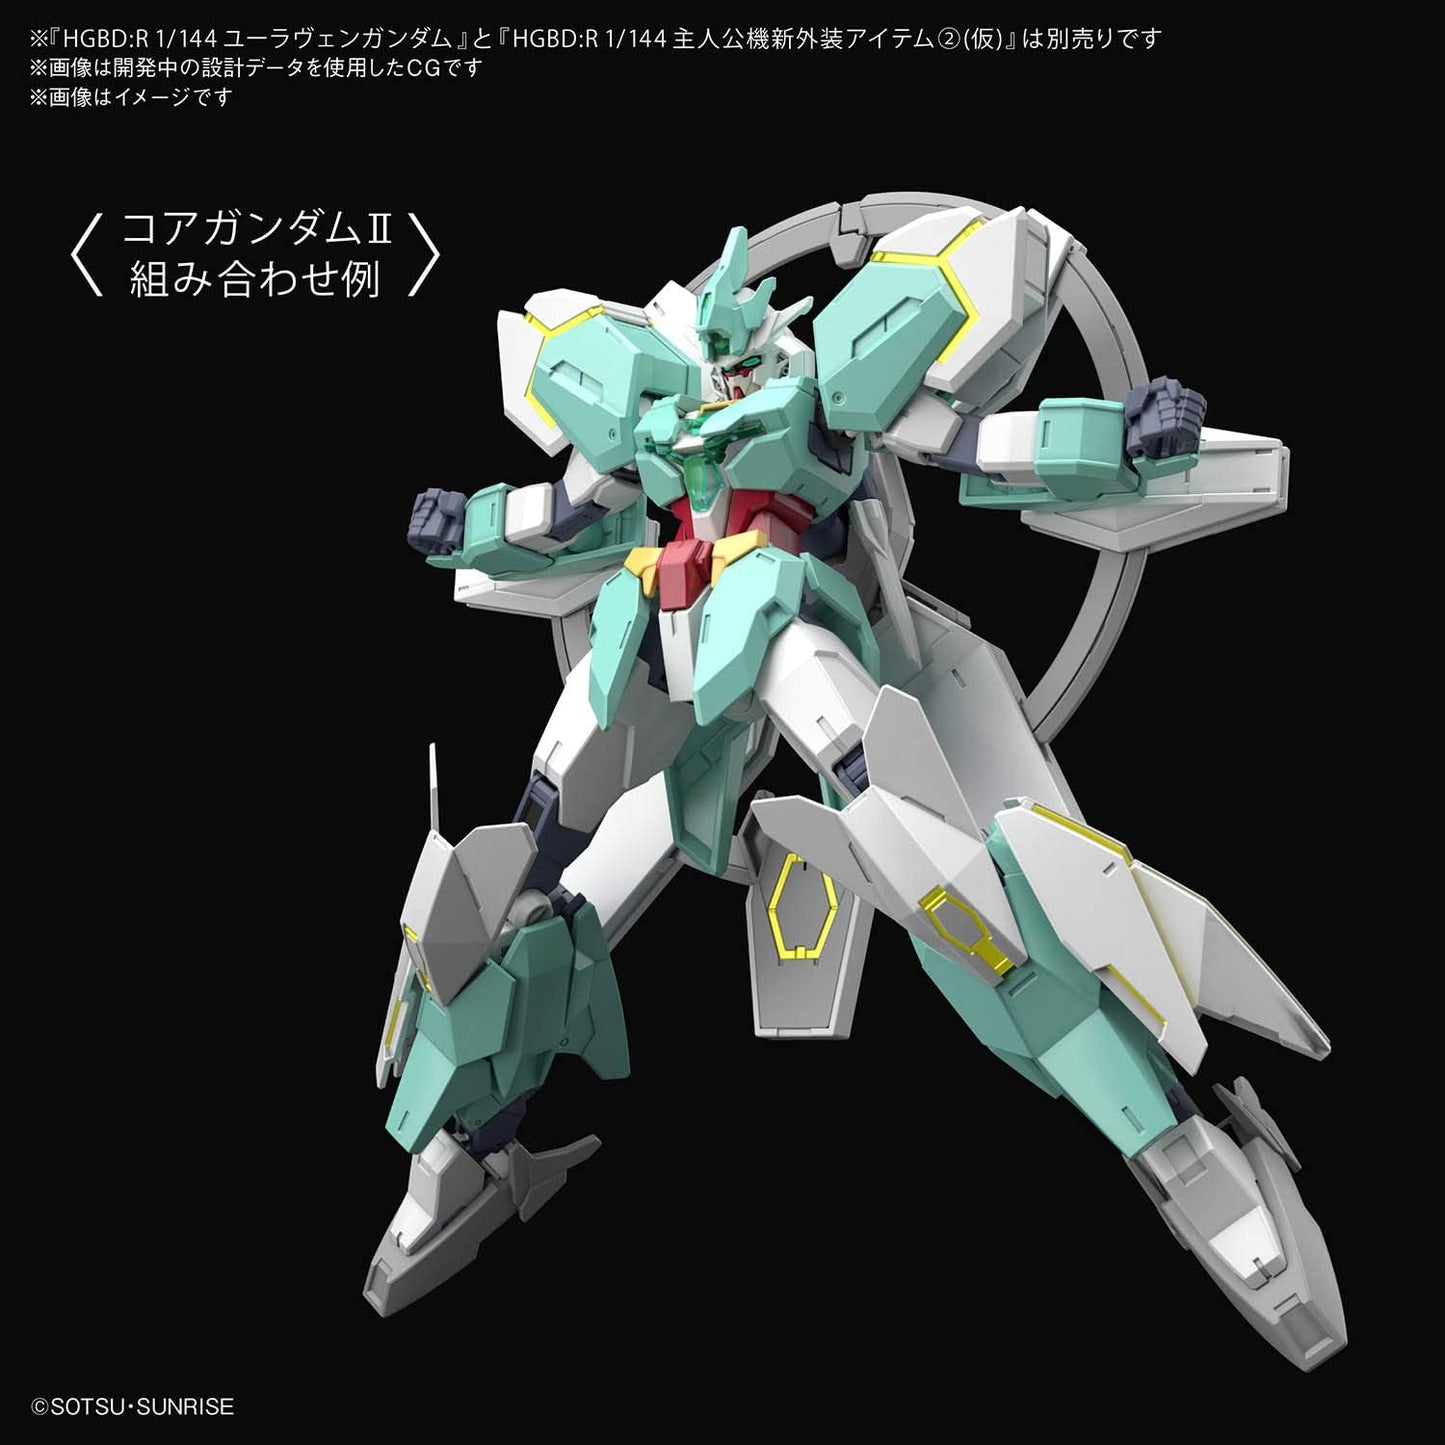 1/144 HGBD:R "Gundam Build Divers Re:Rise" Neptate Weapons | animota